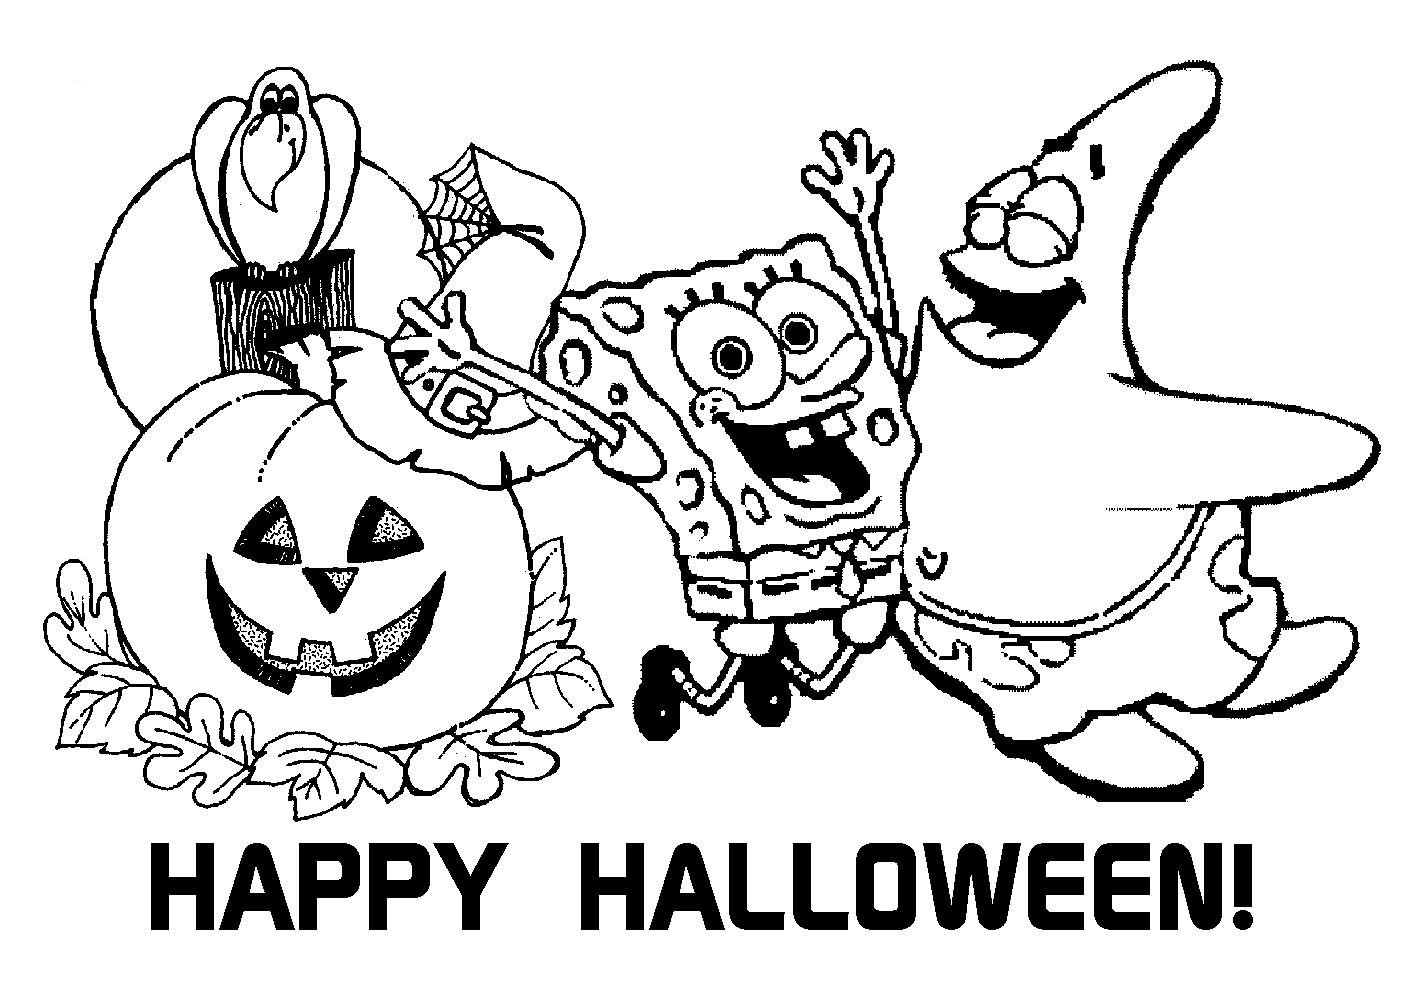 Disney Halloween Coloring Pages For Kids
 Halloween Coloring Pages Free To Download